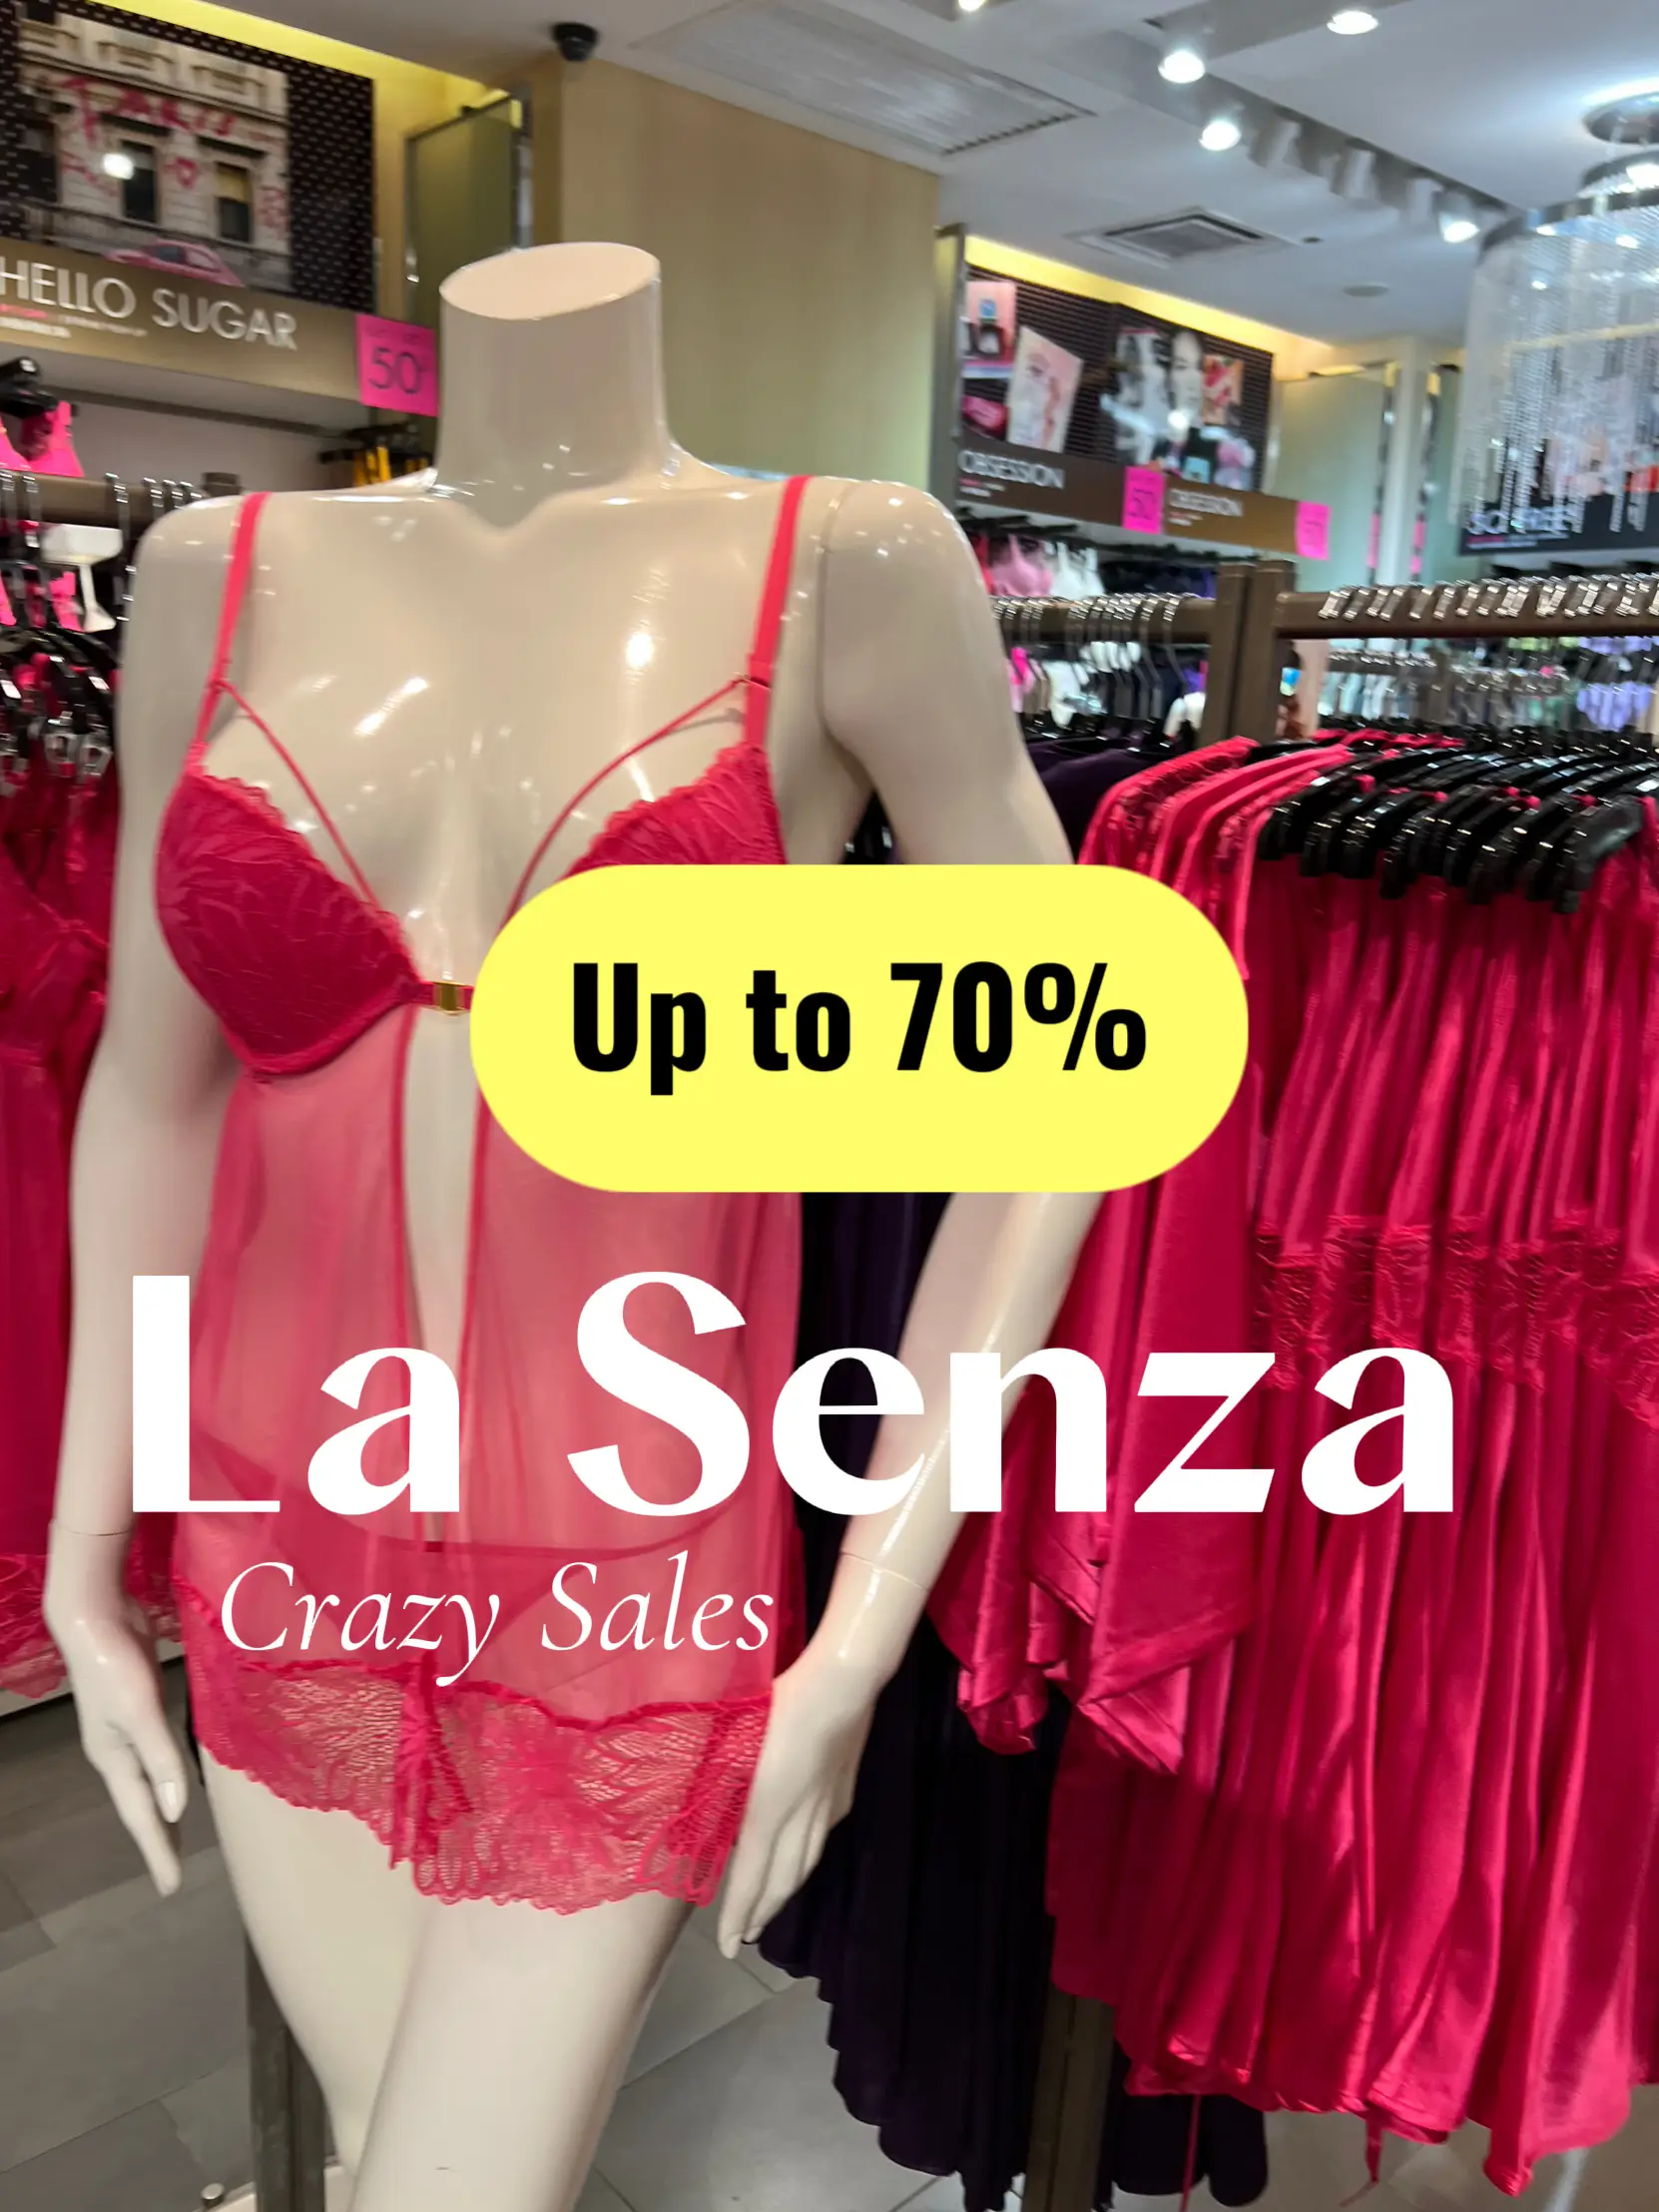 la senza hello sugar - Buy la senza hello sugar at Best Price in Malaysia